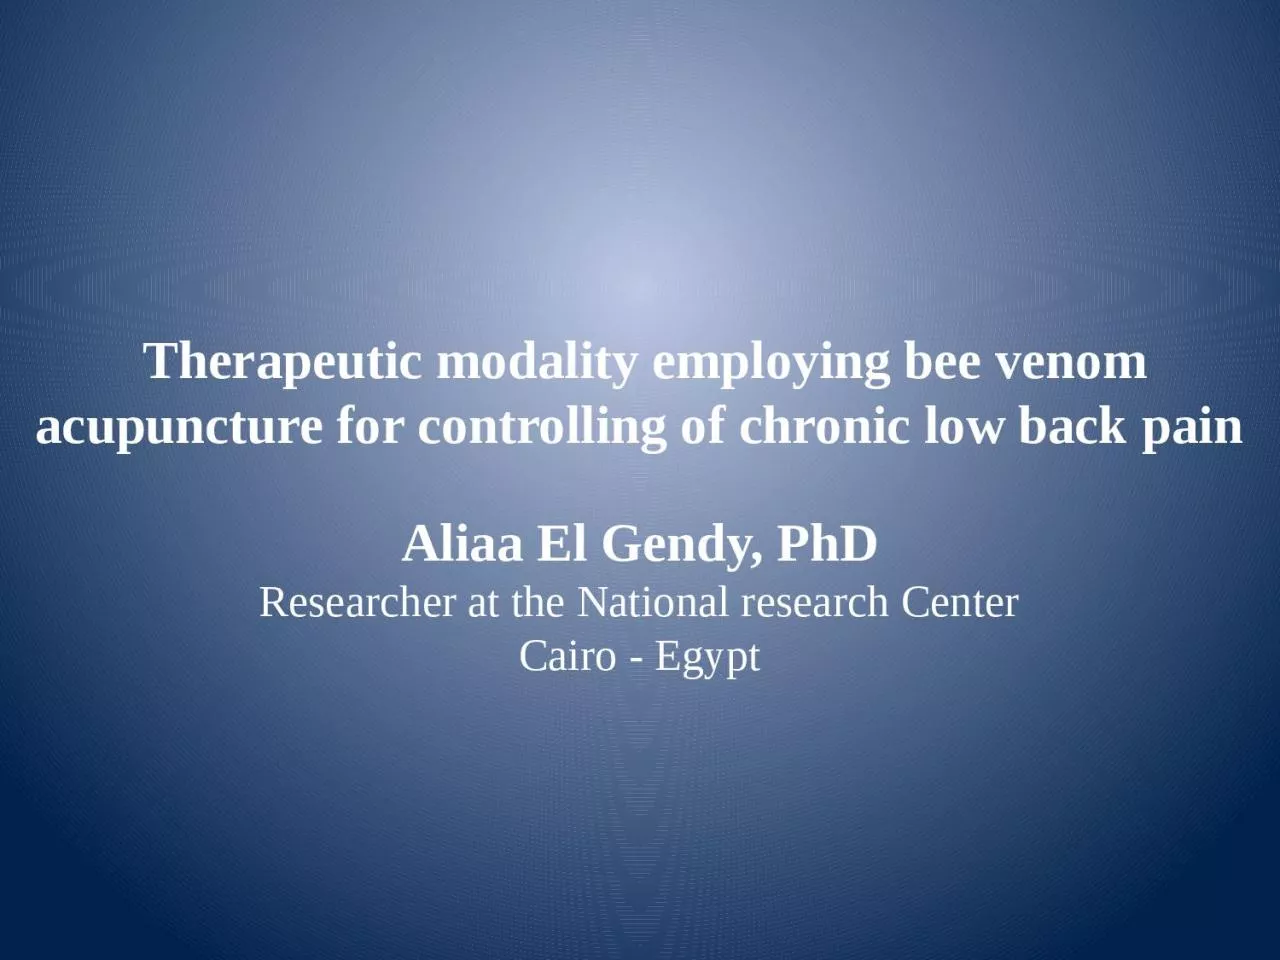 Therapeutic modality employing bee venom acupuncture for controlling of chronic low back